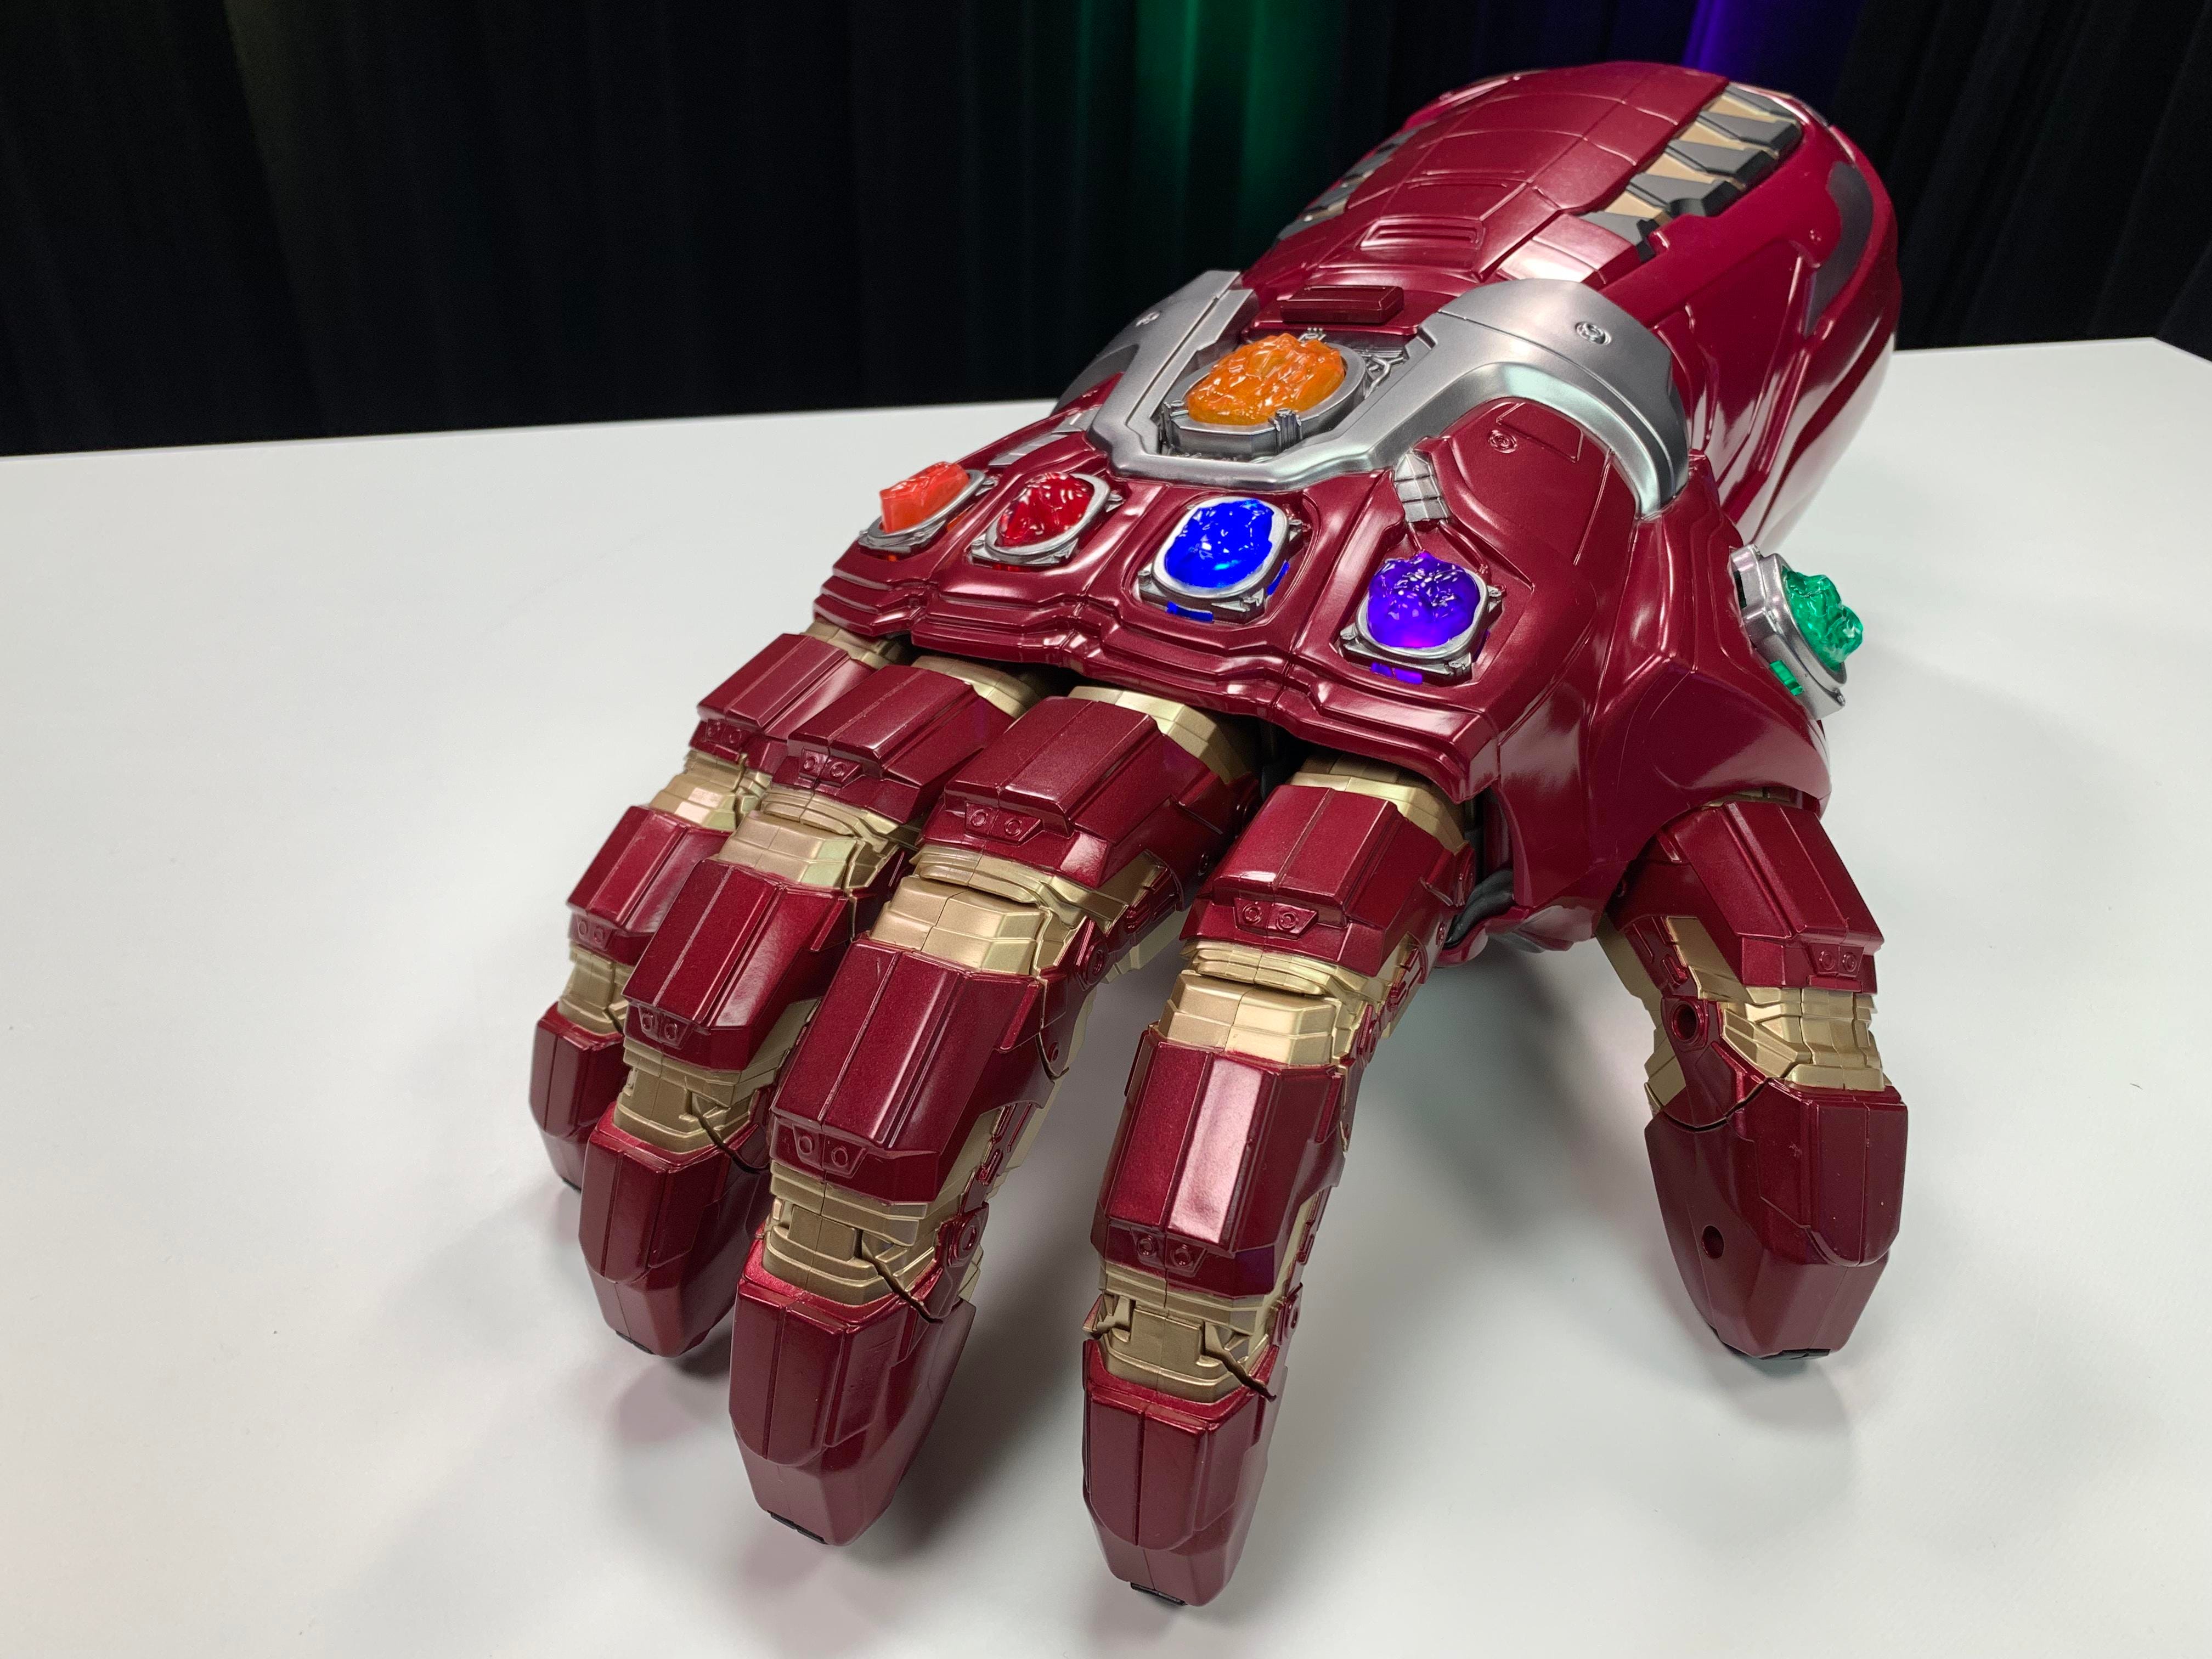 Details about  / Avengers Endgame Iron Man Infinity Gauntlet Thanos Glove Infinity War Marvel